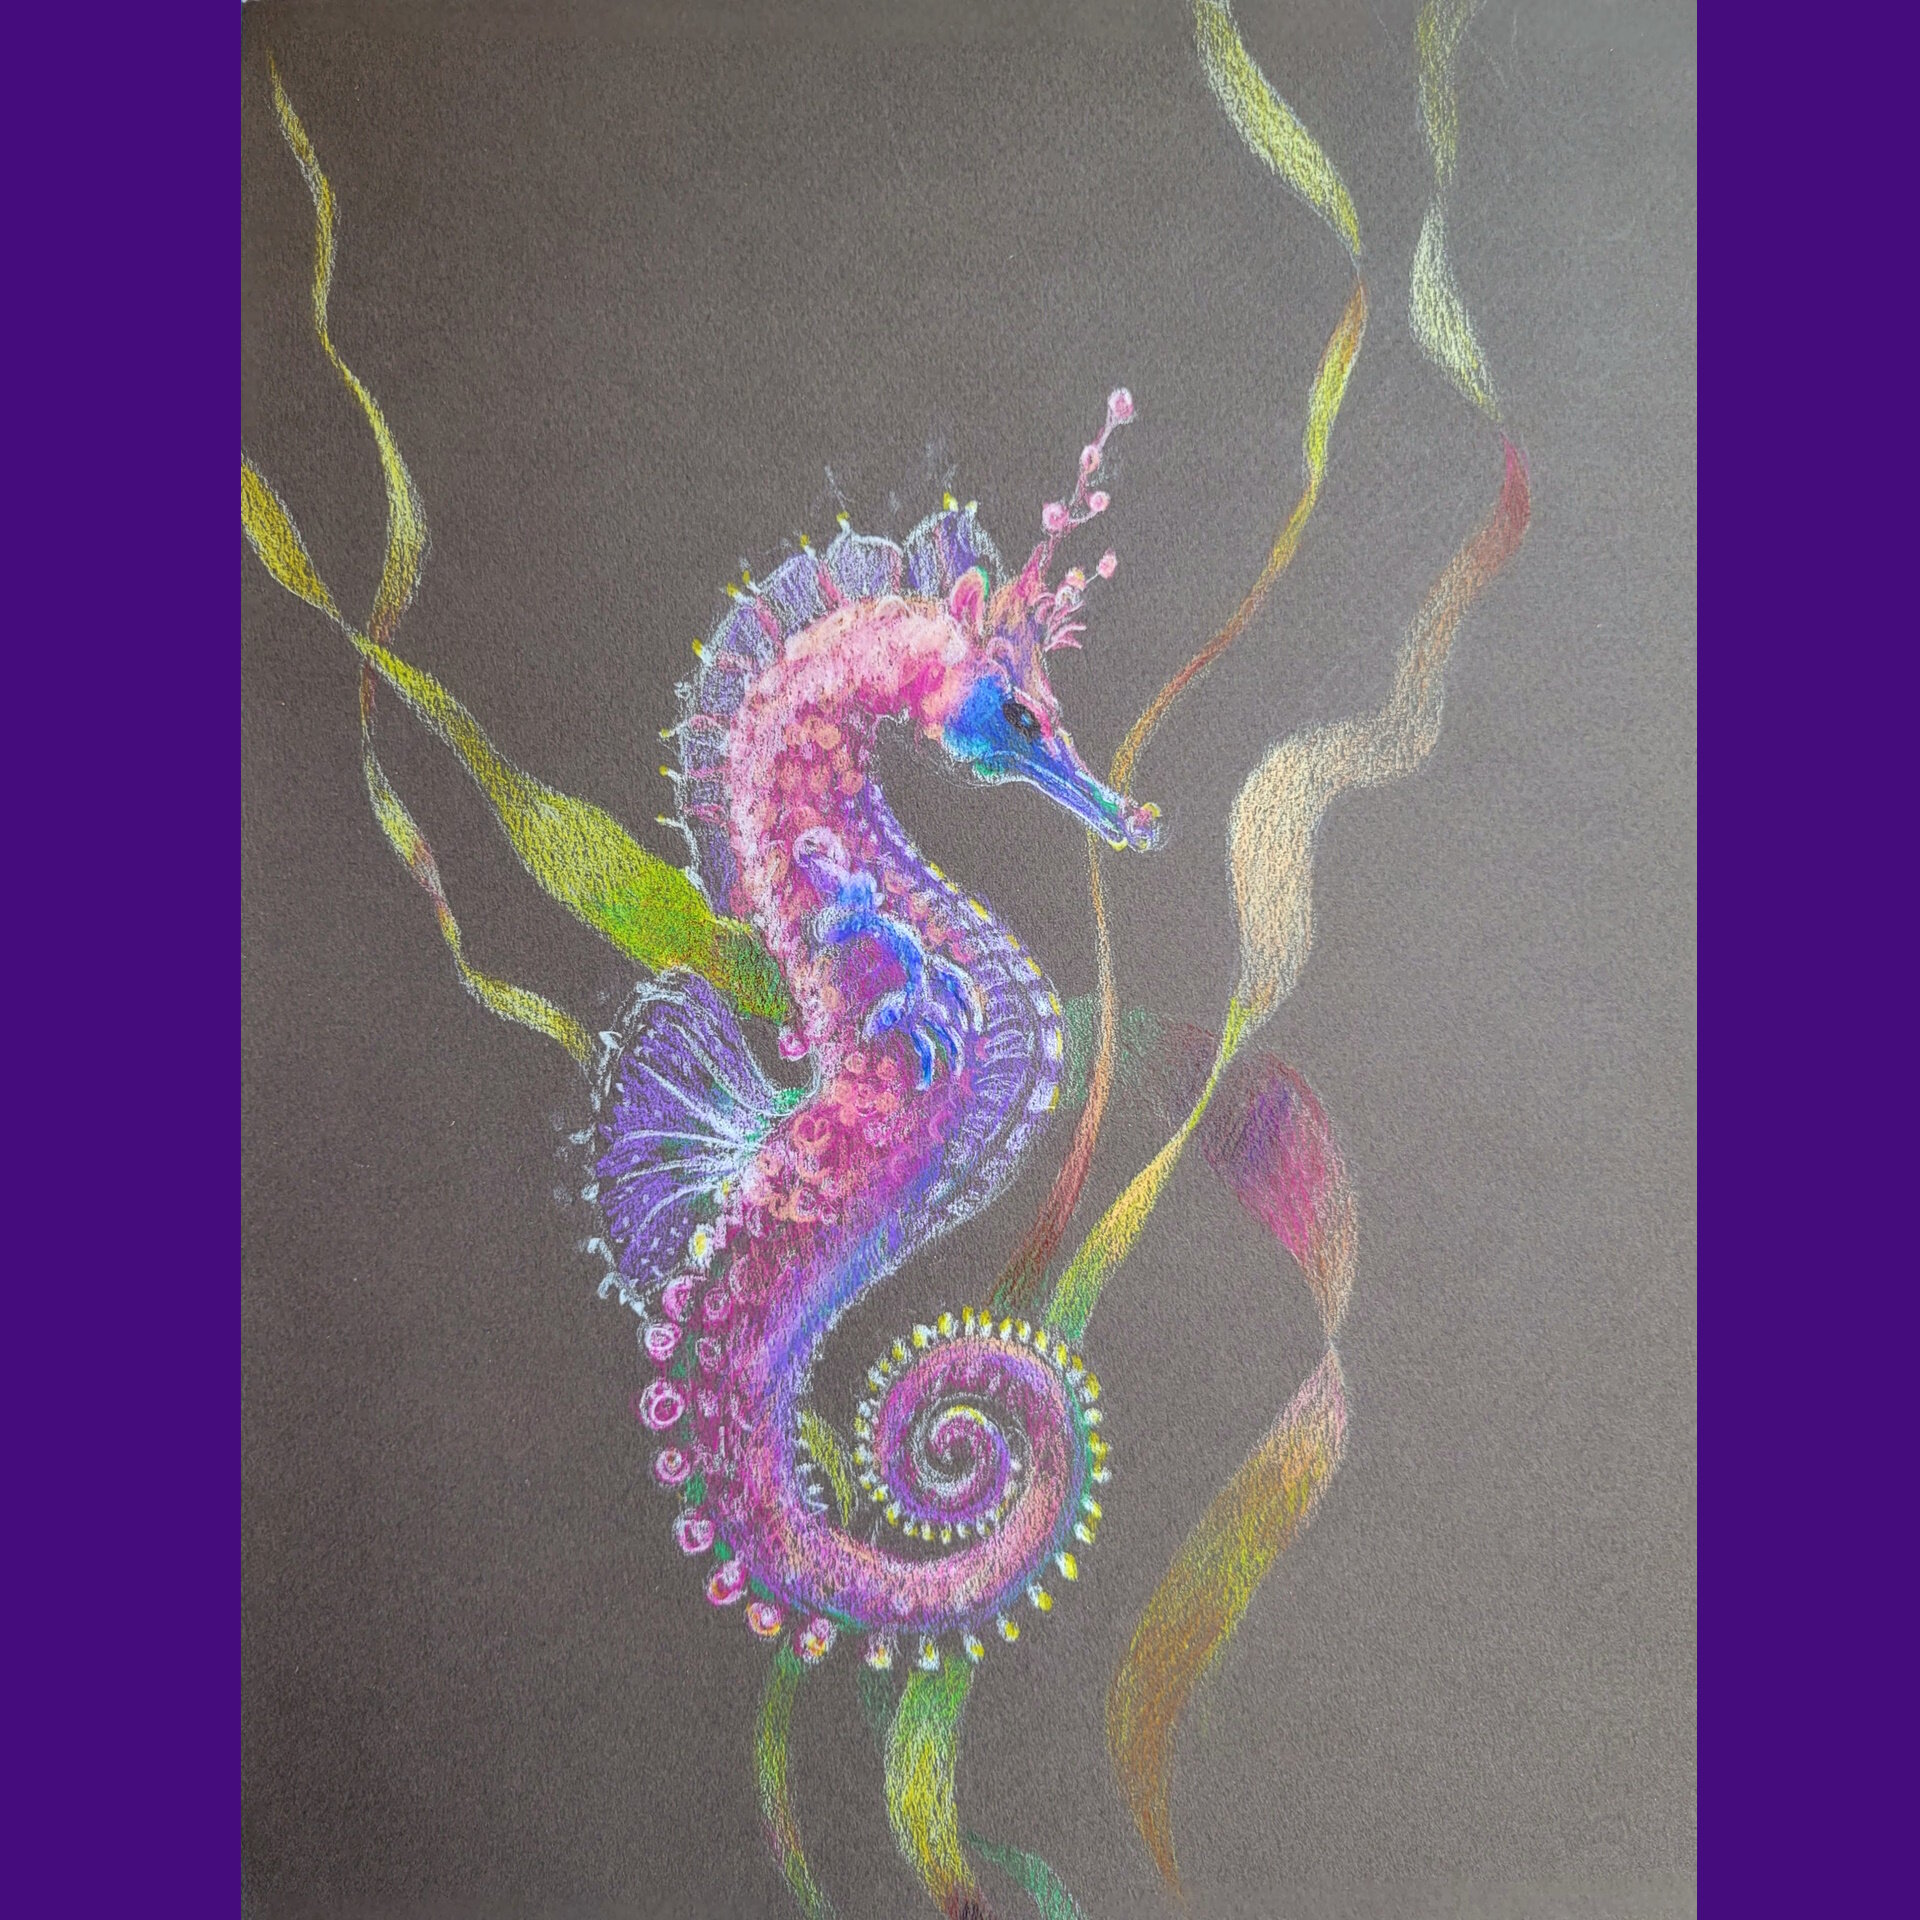 SEAHORSE SUNDAY Just a little seahorse I drew while teaching my Drawing with Colored Pencils class for the Chicago Botanic Garden on zoom. #chicagobotanic #seahorse ##coloredpencildrawing #coloredpencilinstruction #drawinginstruction #seahorsesrule #